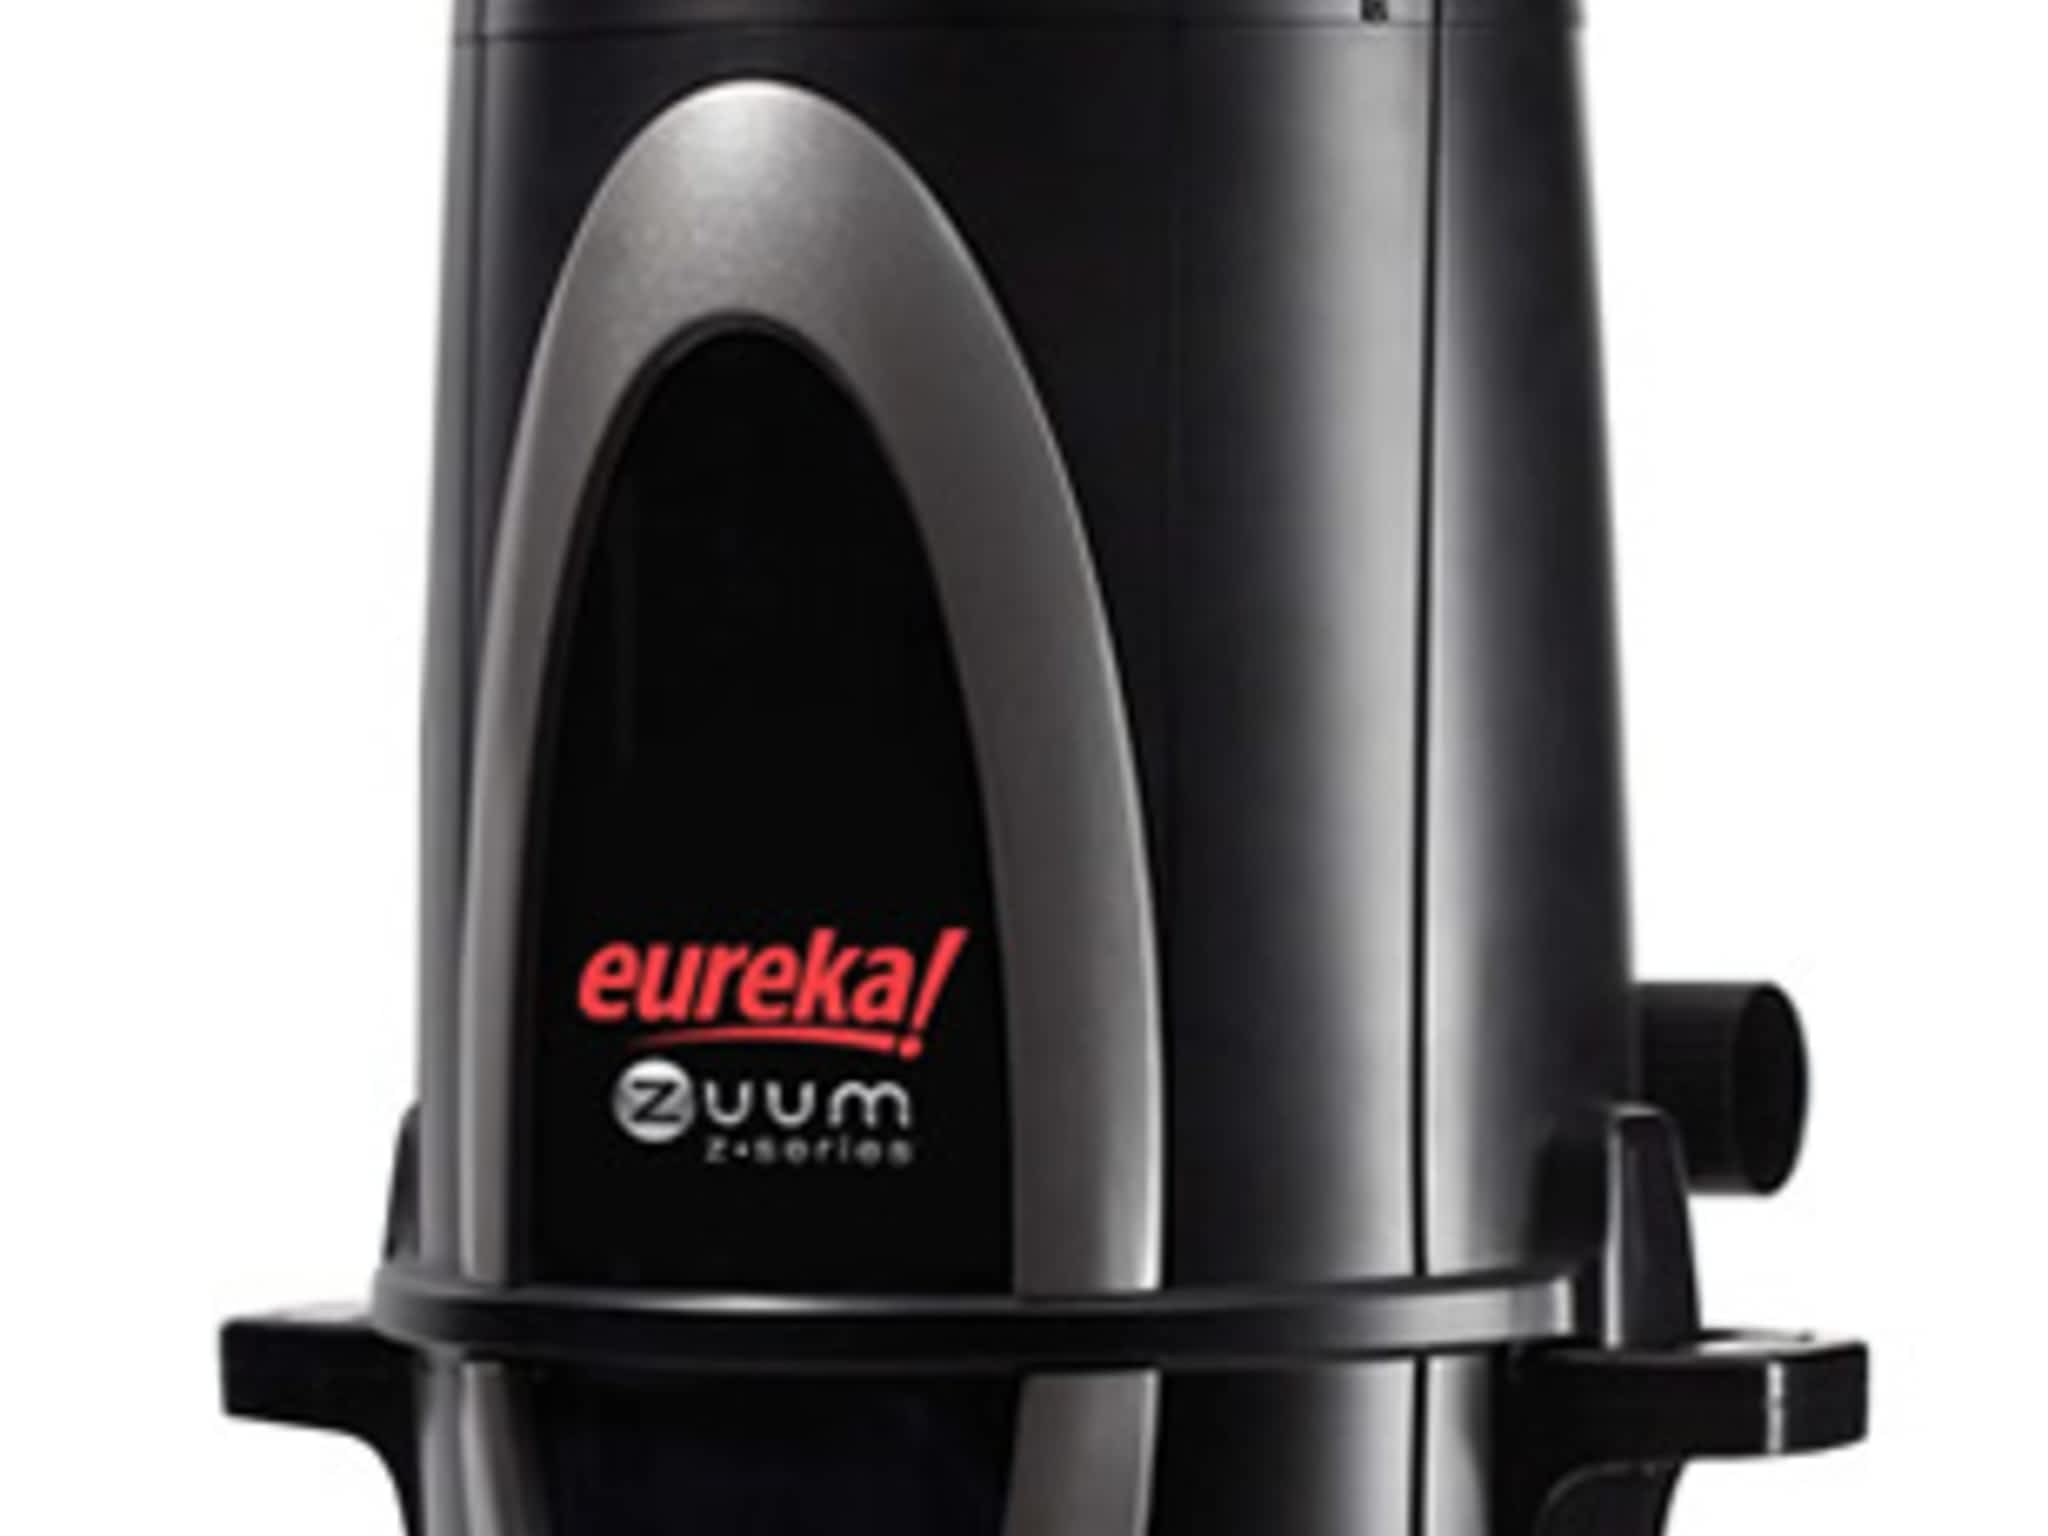 photo Central Vacuum Systems Sales and Repair Whitby